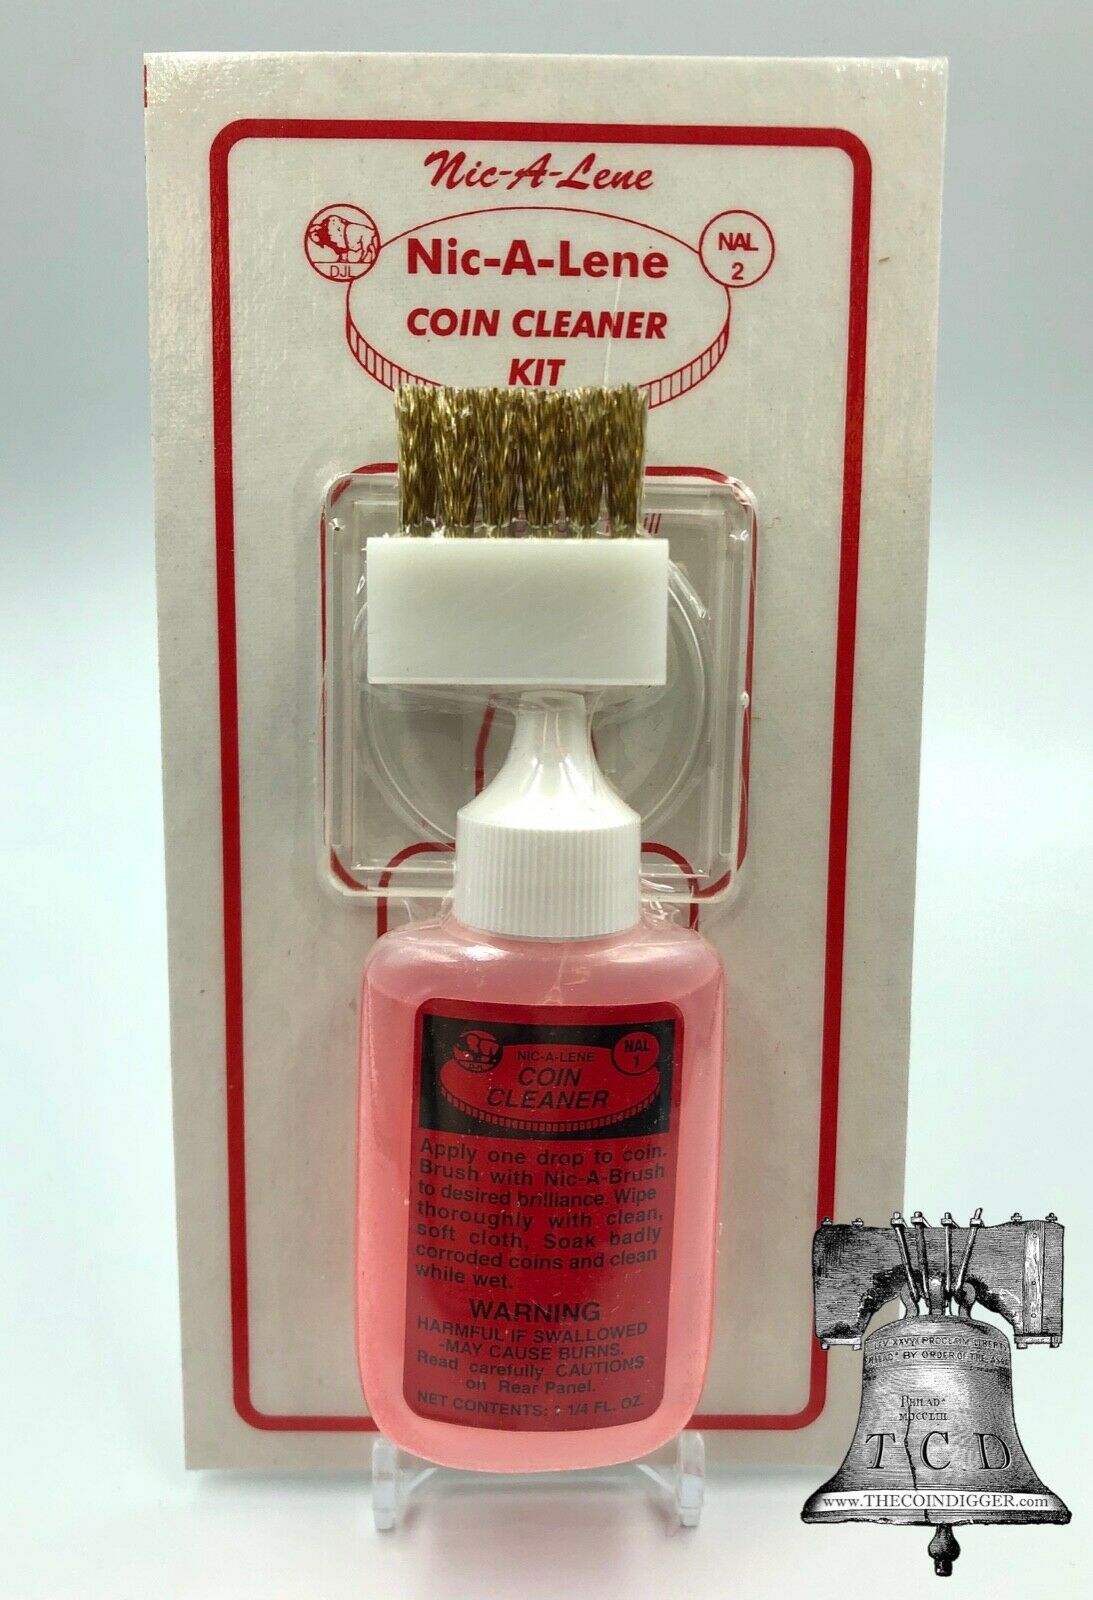 Nik-a-pak coin cleaner kit  How to clean coins, Cleaning kit